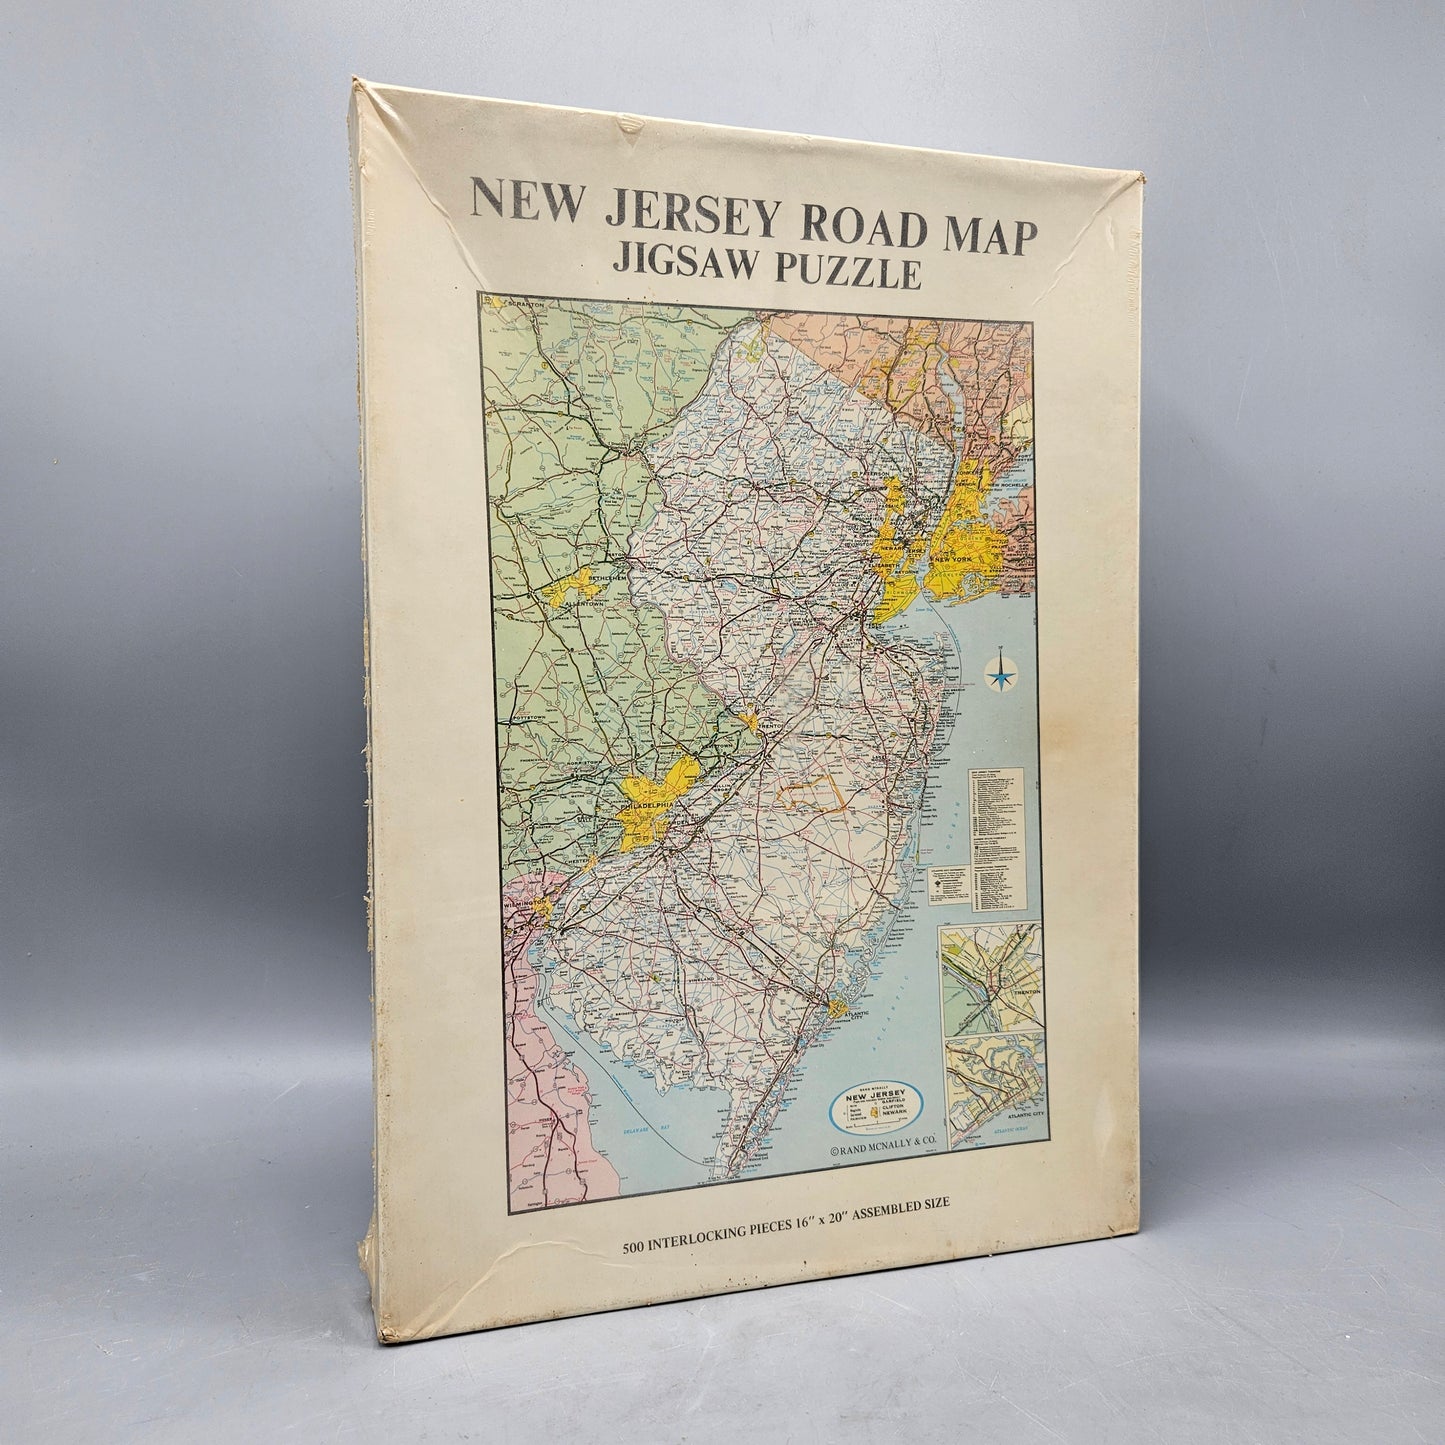 New Jersey Road Map Jigsaw Puzzle 500 Piece Gameophiles Rand McNally - SEALED